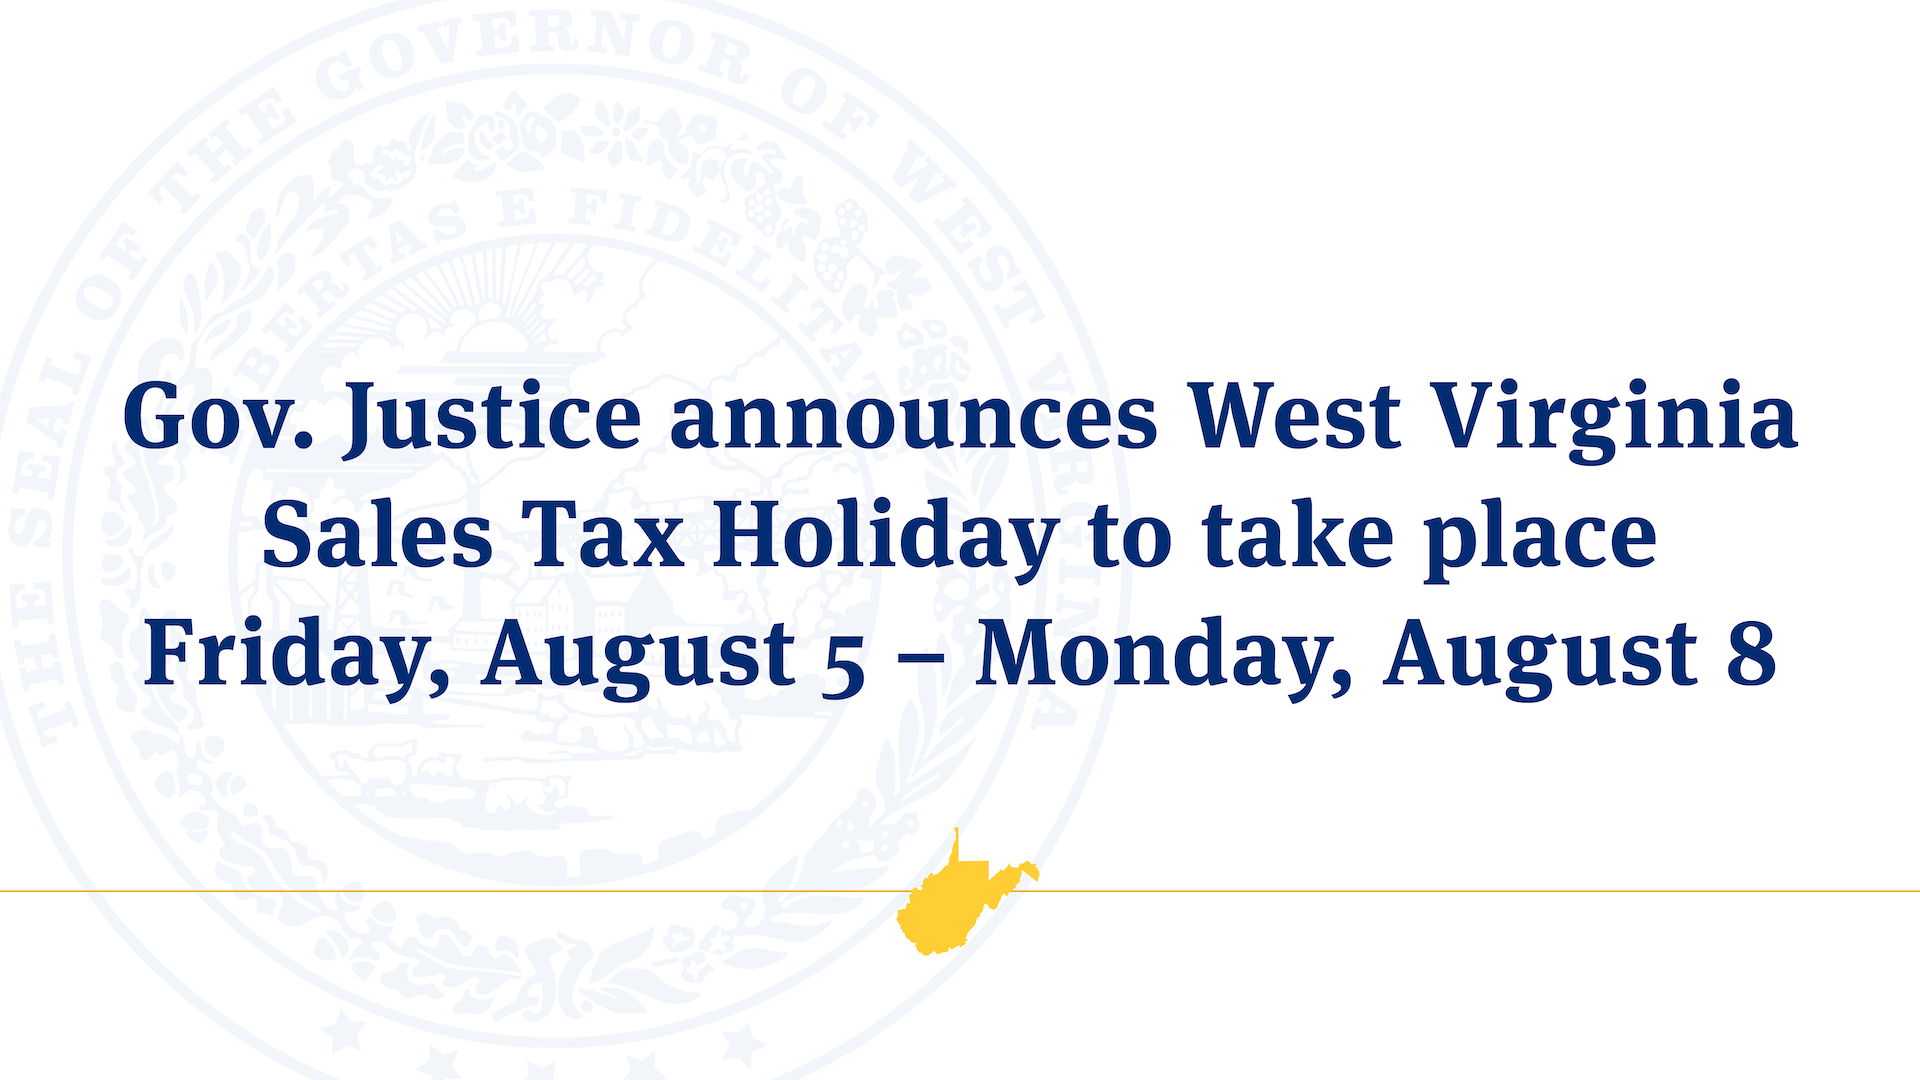 Gov. Justice announces West Virginia Sales Tax Holiday to take place